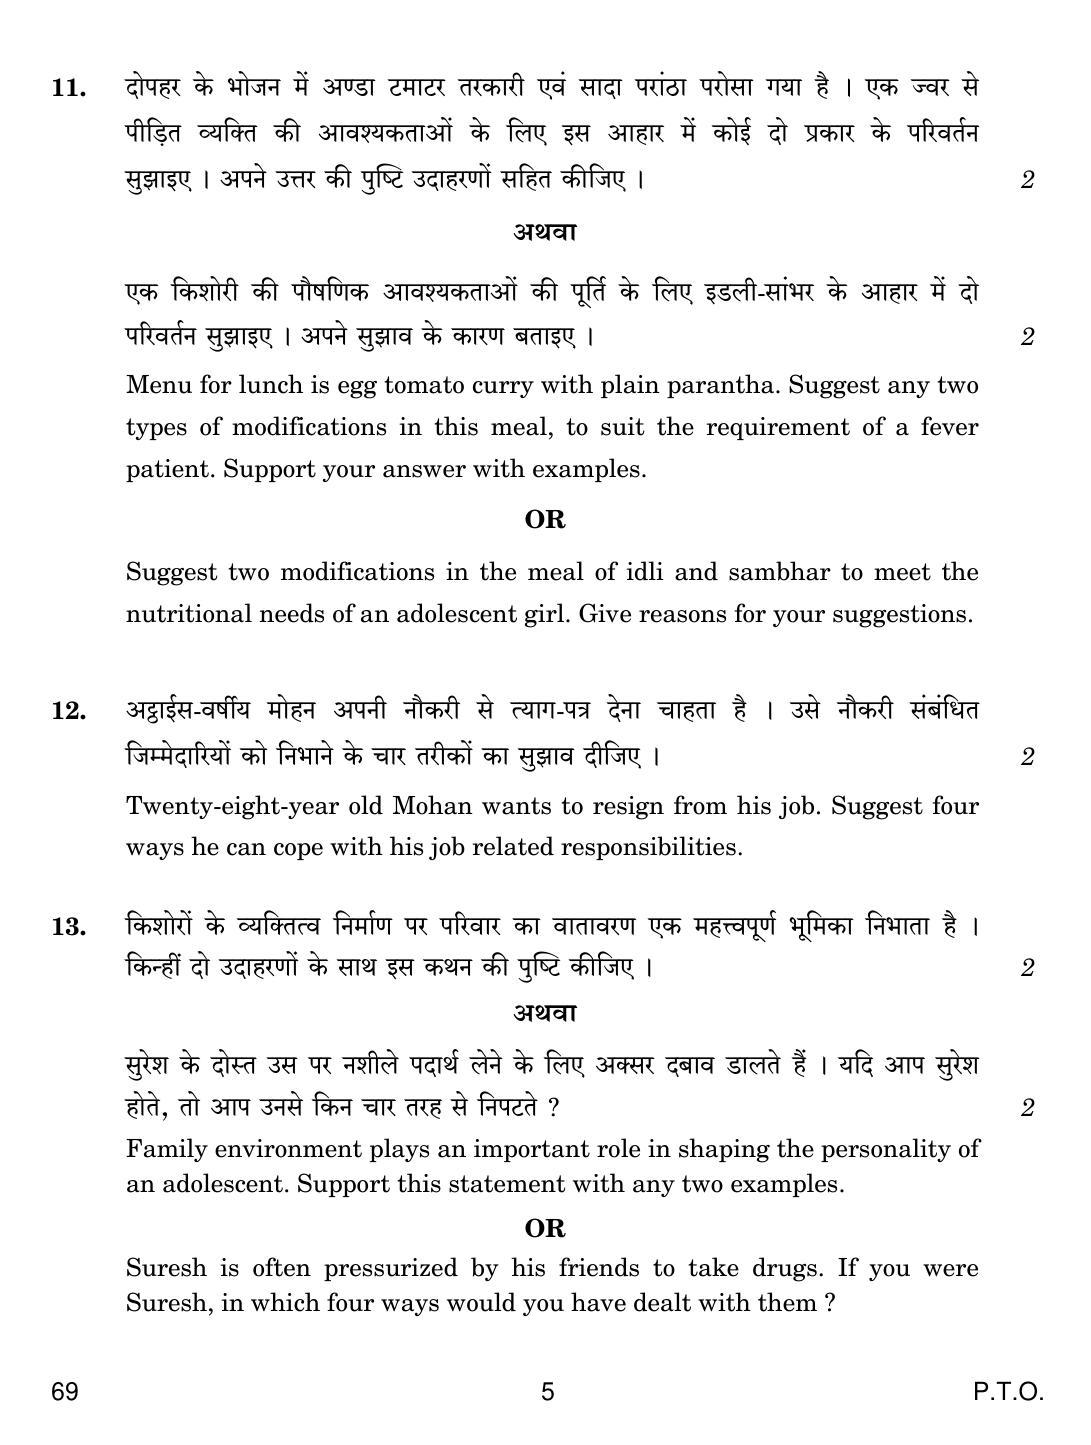 CBSE Class 12 69 Home Science 2019 Question Paper - Page 5